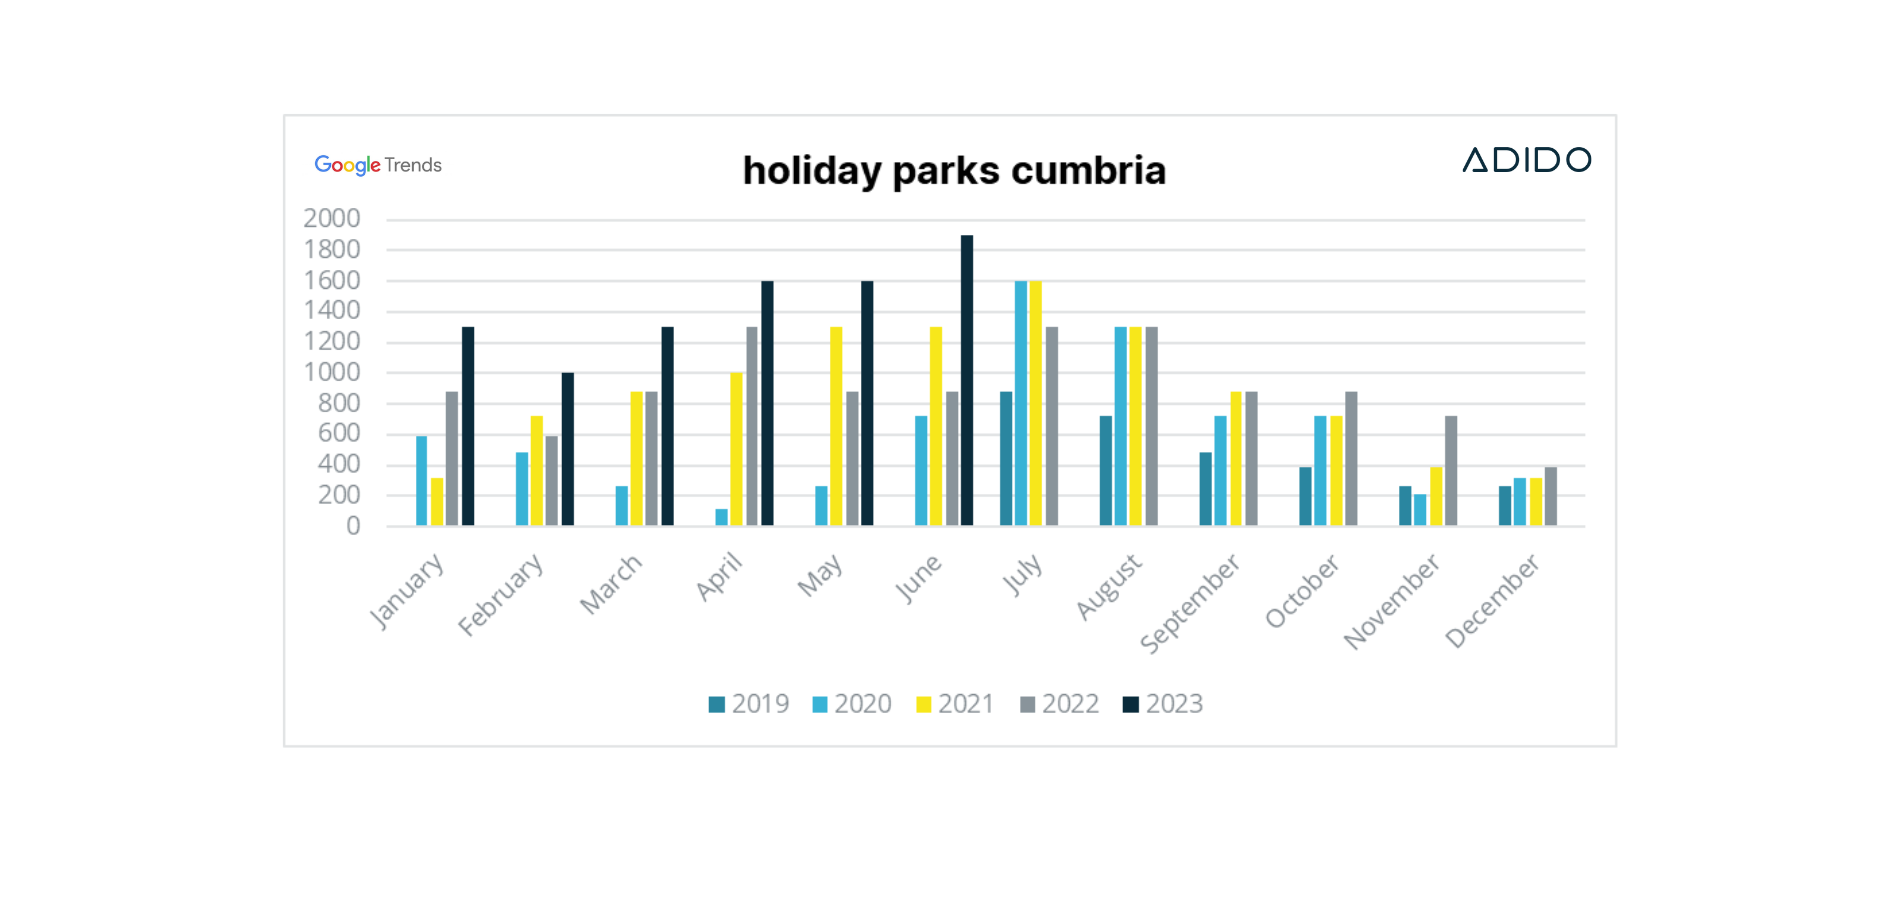 Holiday parks cumbria search trend 2019 2023